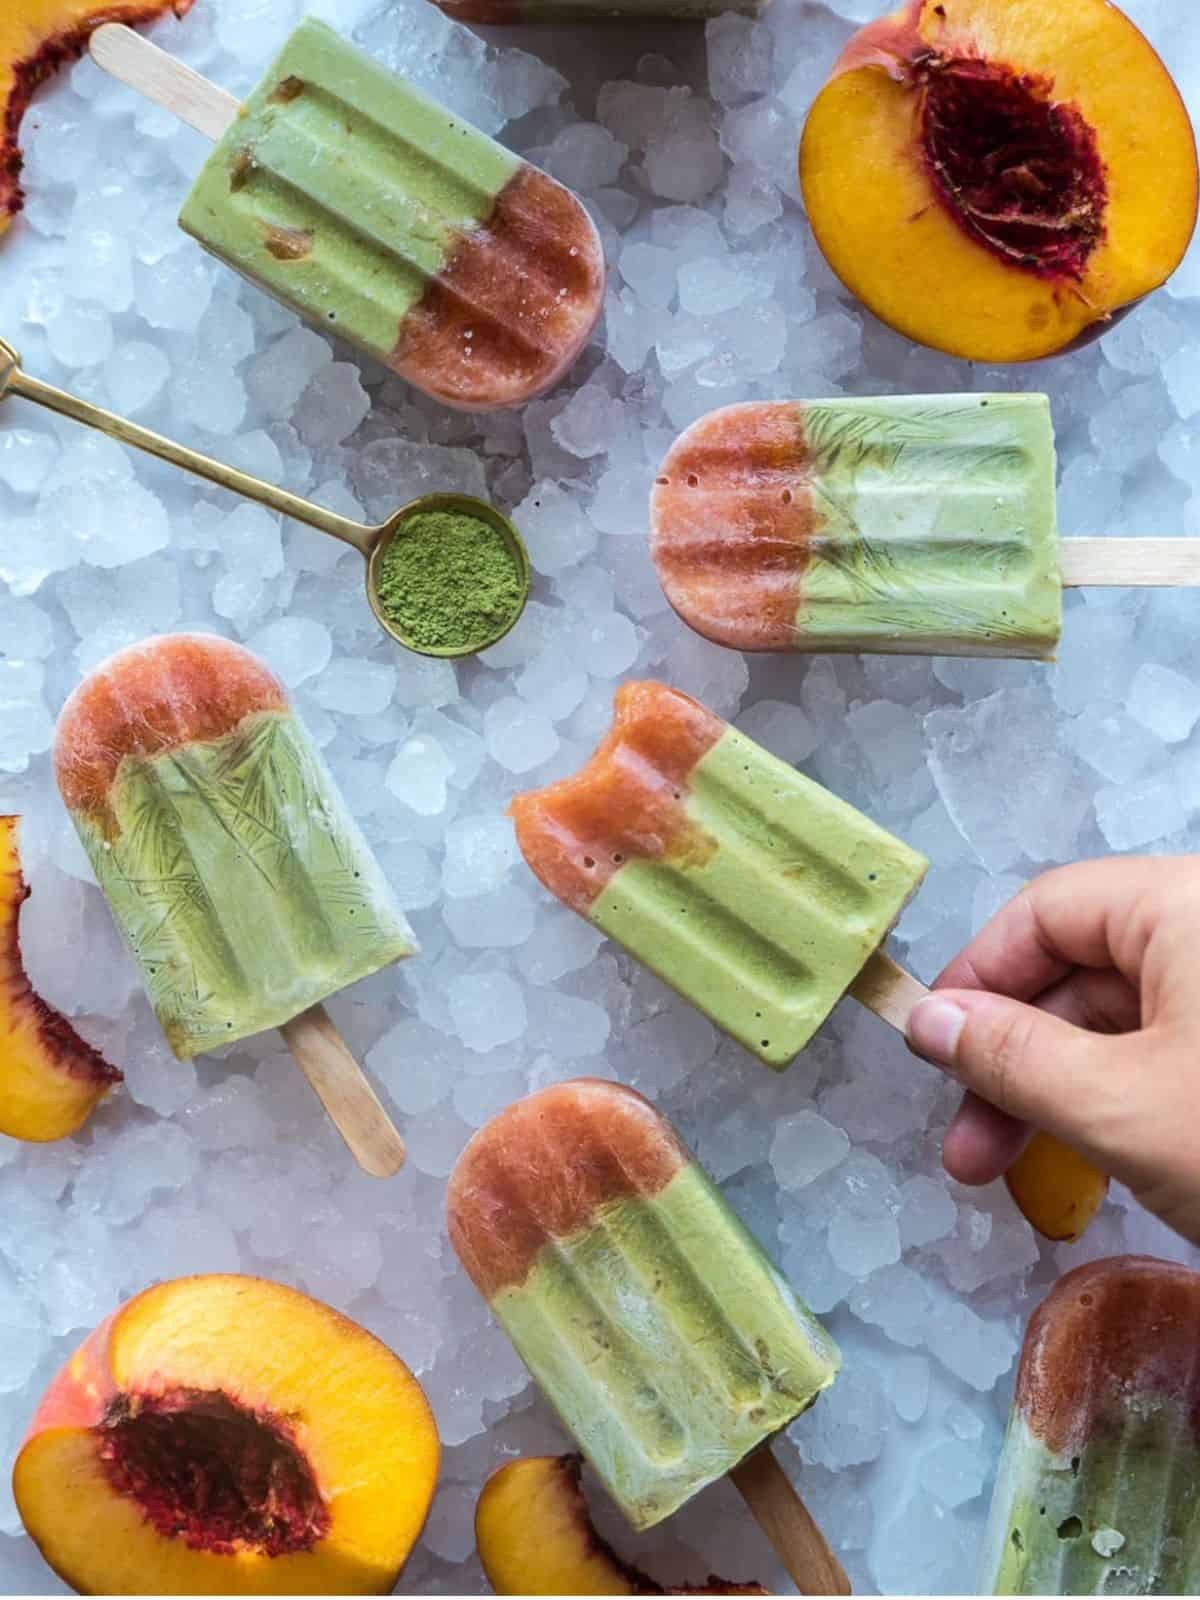 creamy and refreshing matcha and peach popsicles made with peach, coconut milk, avocado, matcha, and maple syrup.